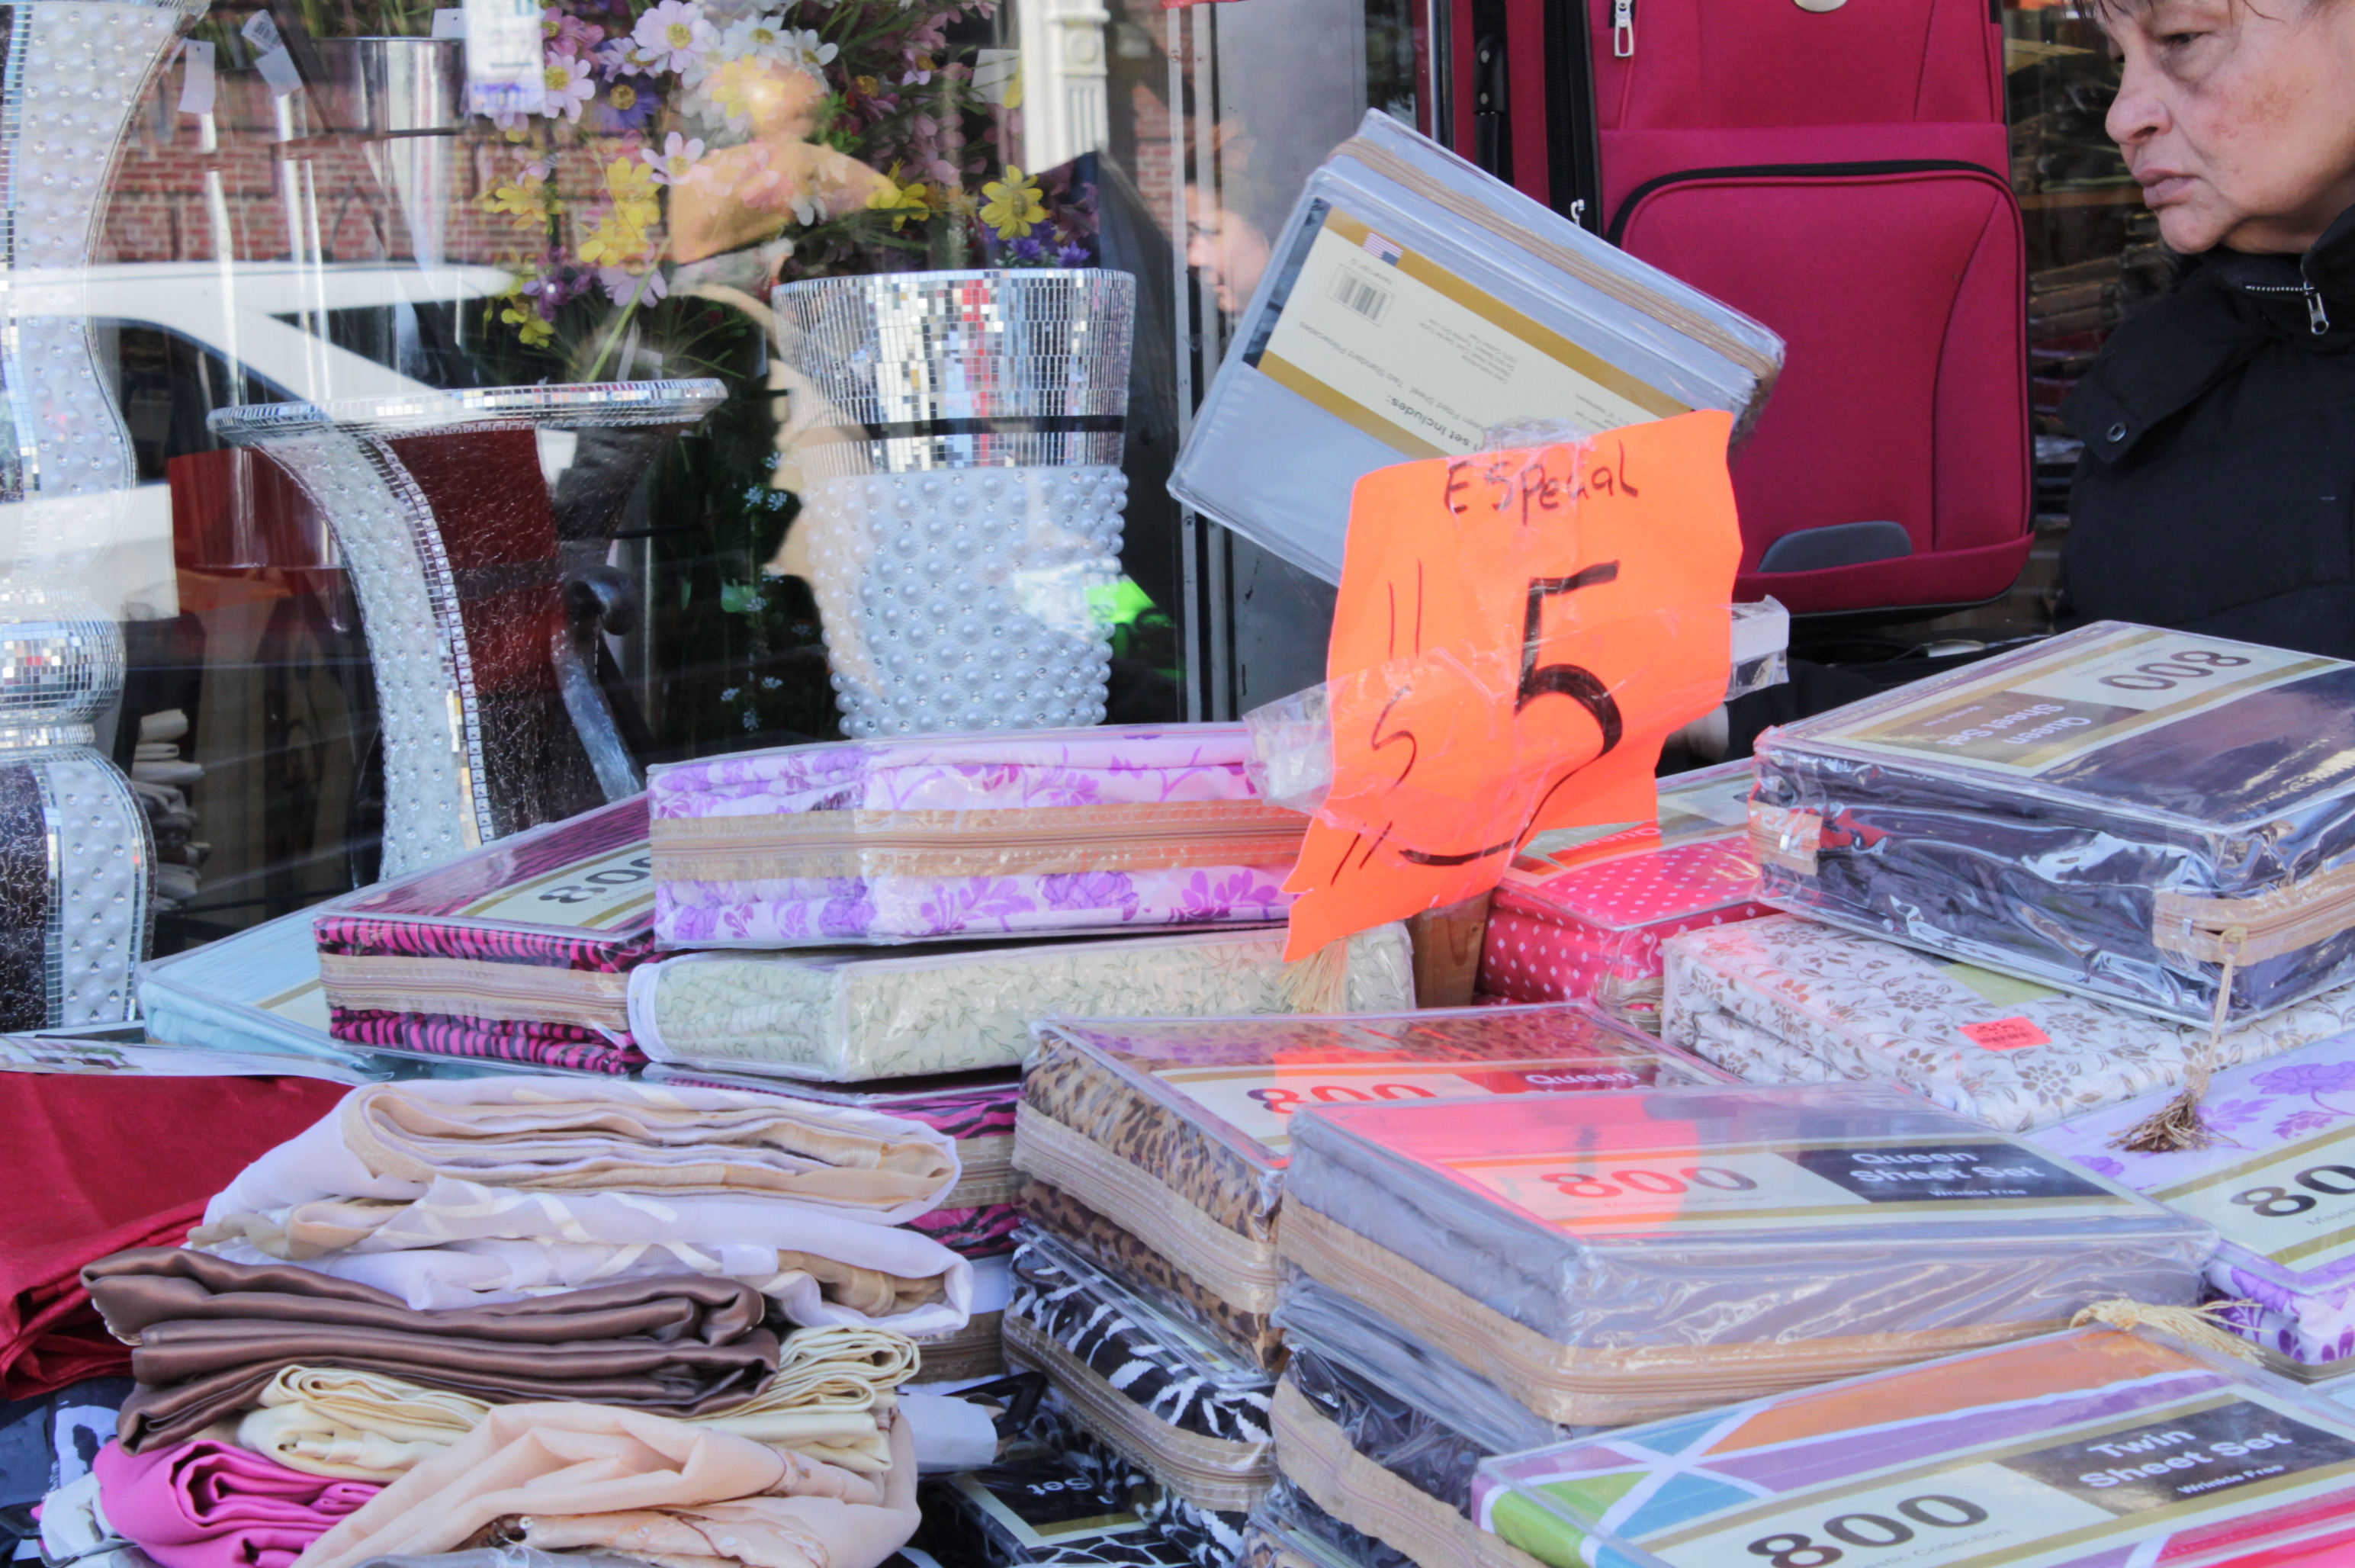 Photograph of a table with many different types of fabric for sale. There is a bright pink paper sign in the center of the table that says Sale in Spanish